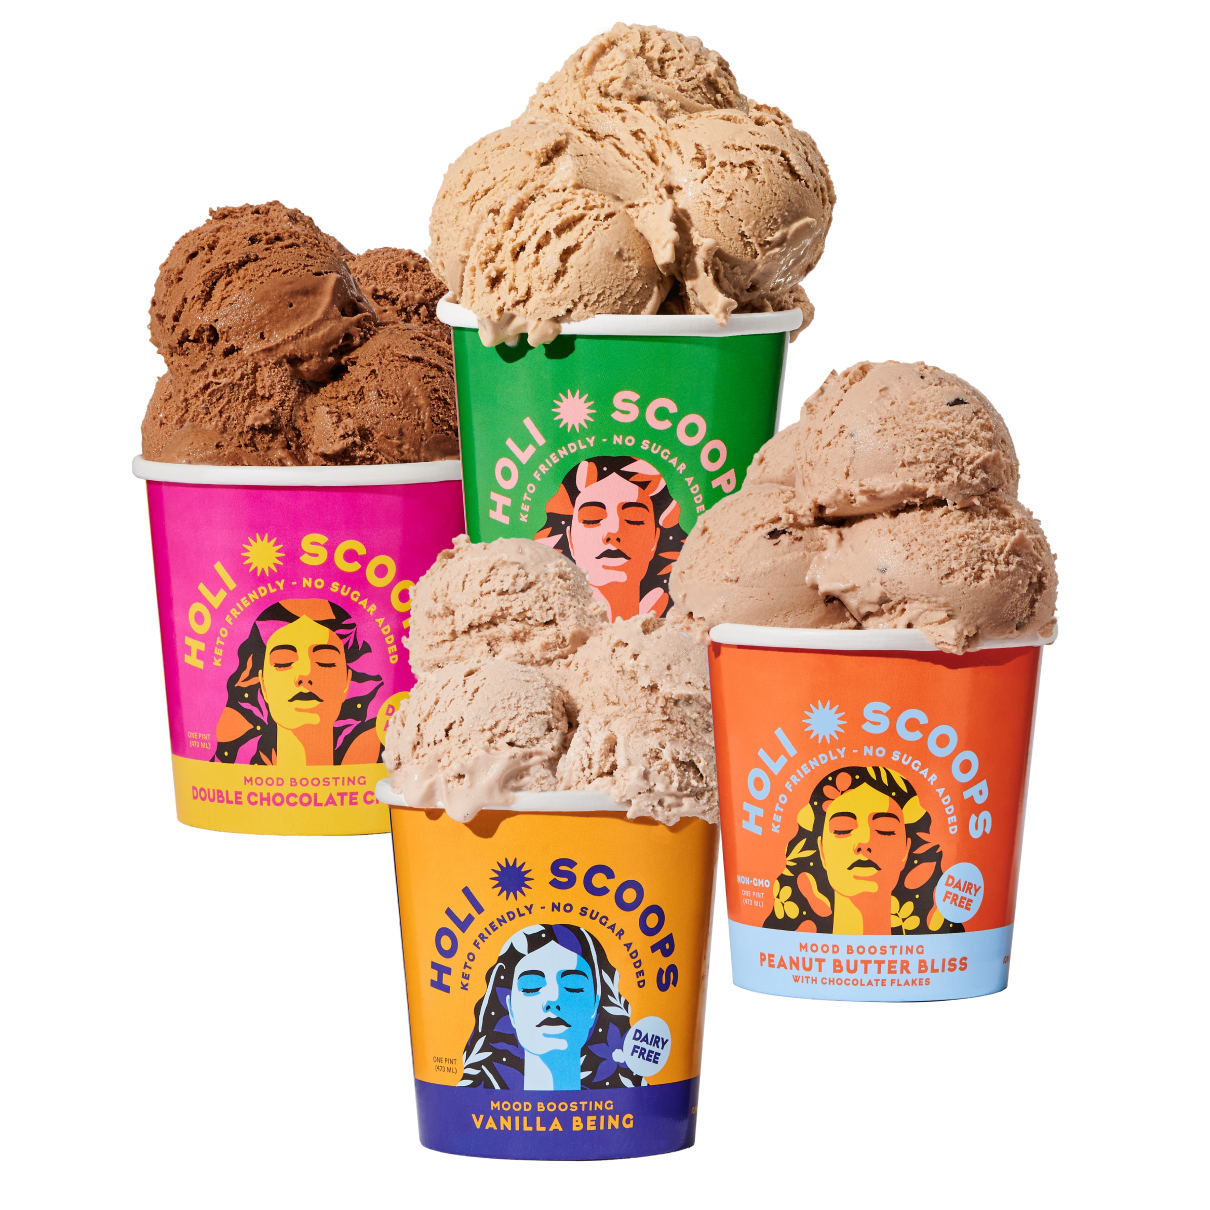 FREE Pint of Holi Scoops Ice Cream at Sprouts